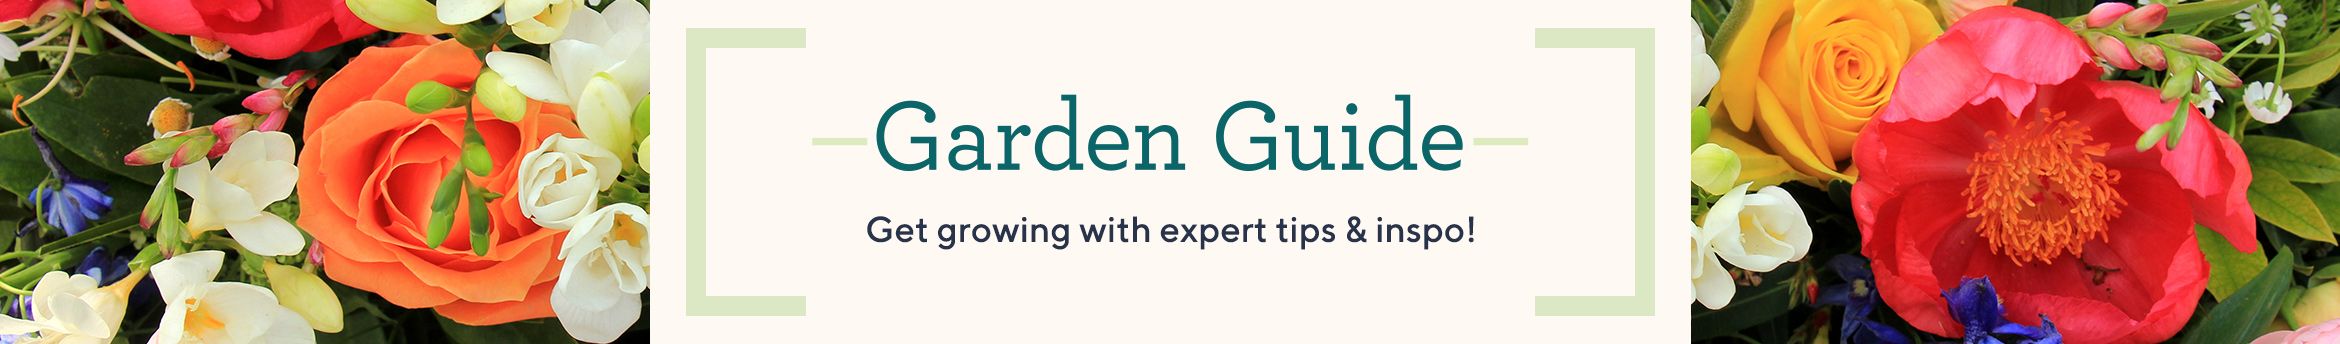 Garden Guide - Get growing with expert tips & inspo!